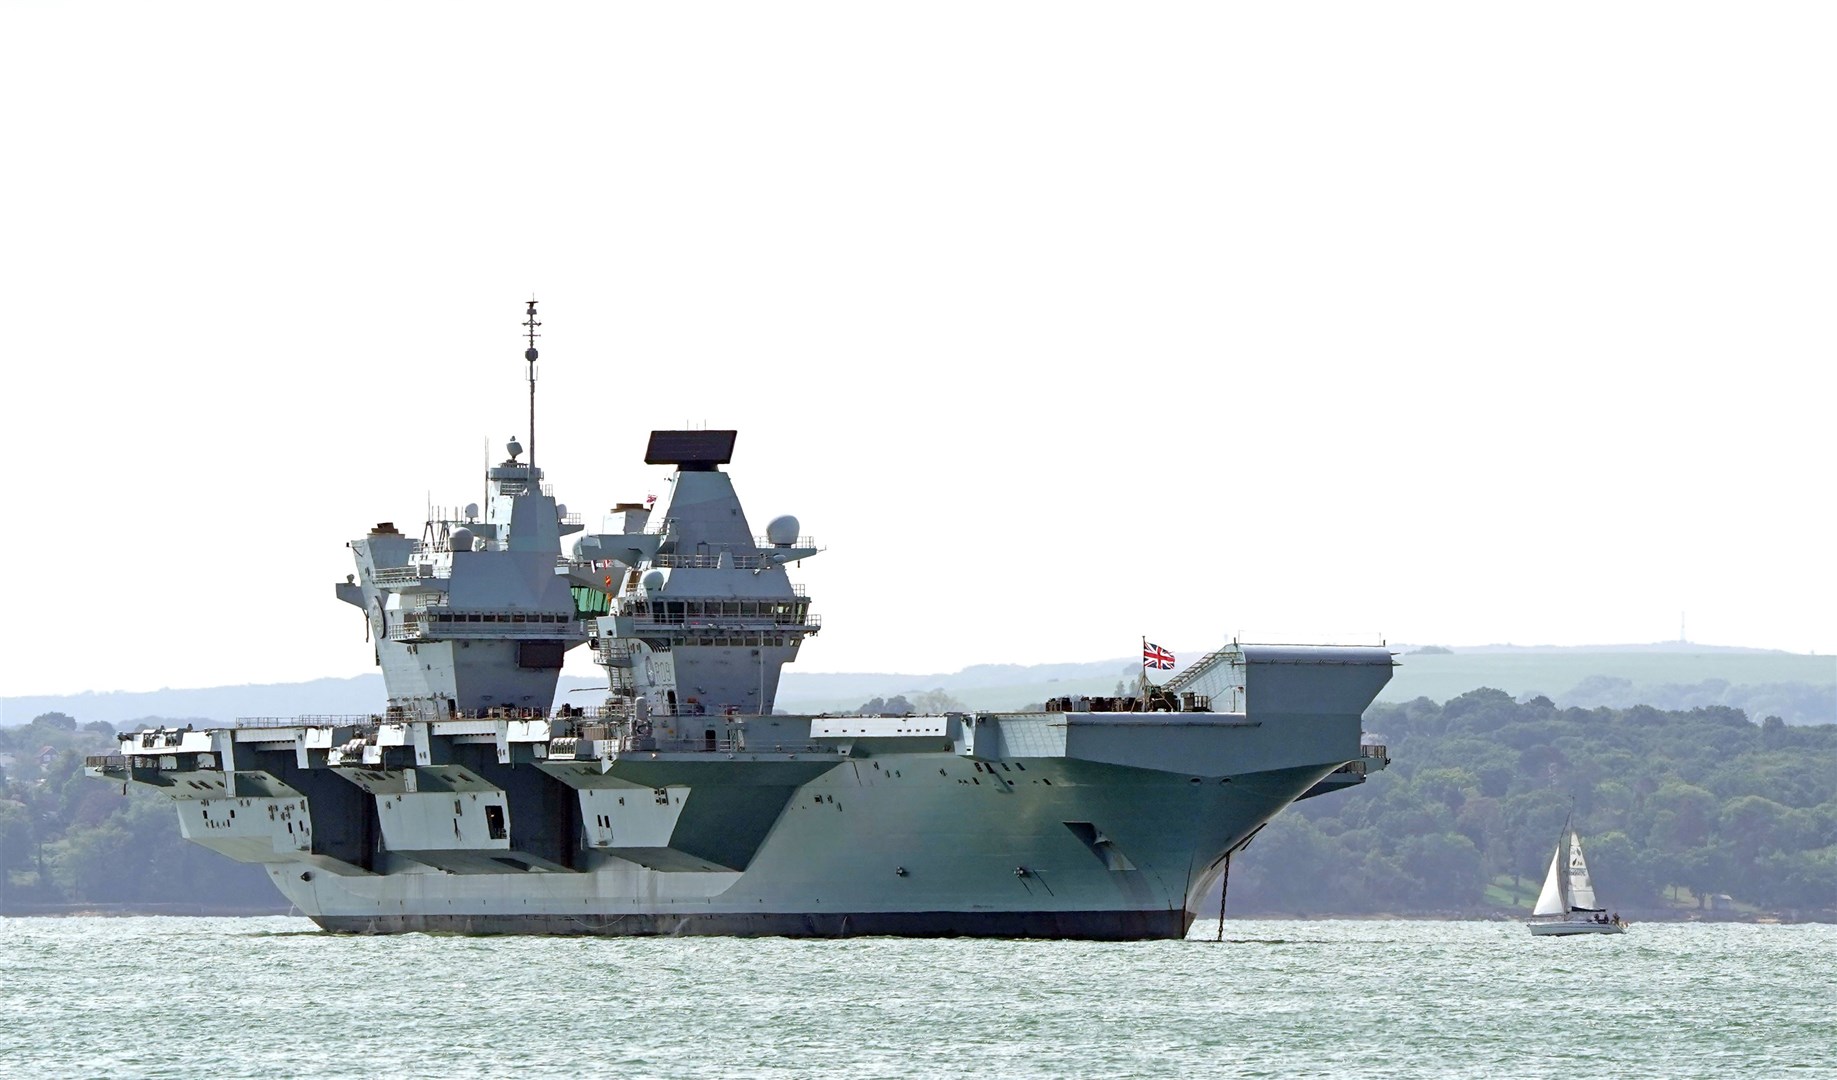 HMS Prince of Wales, the £3 billion aircraft carrier which broke down off the Isle of Wight in August 2022 (Gareth Fuller/PA)